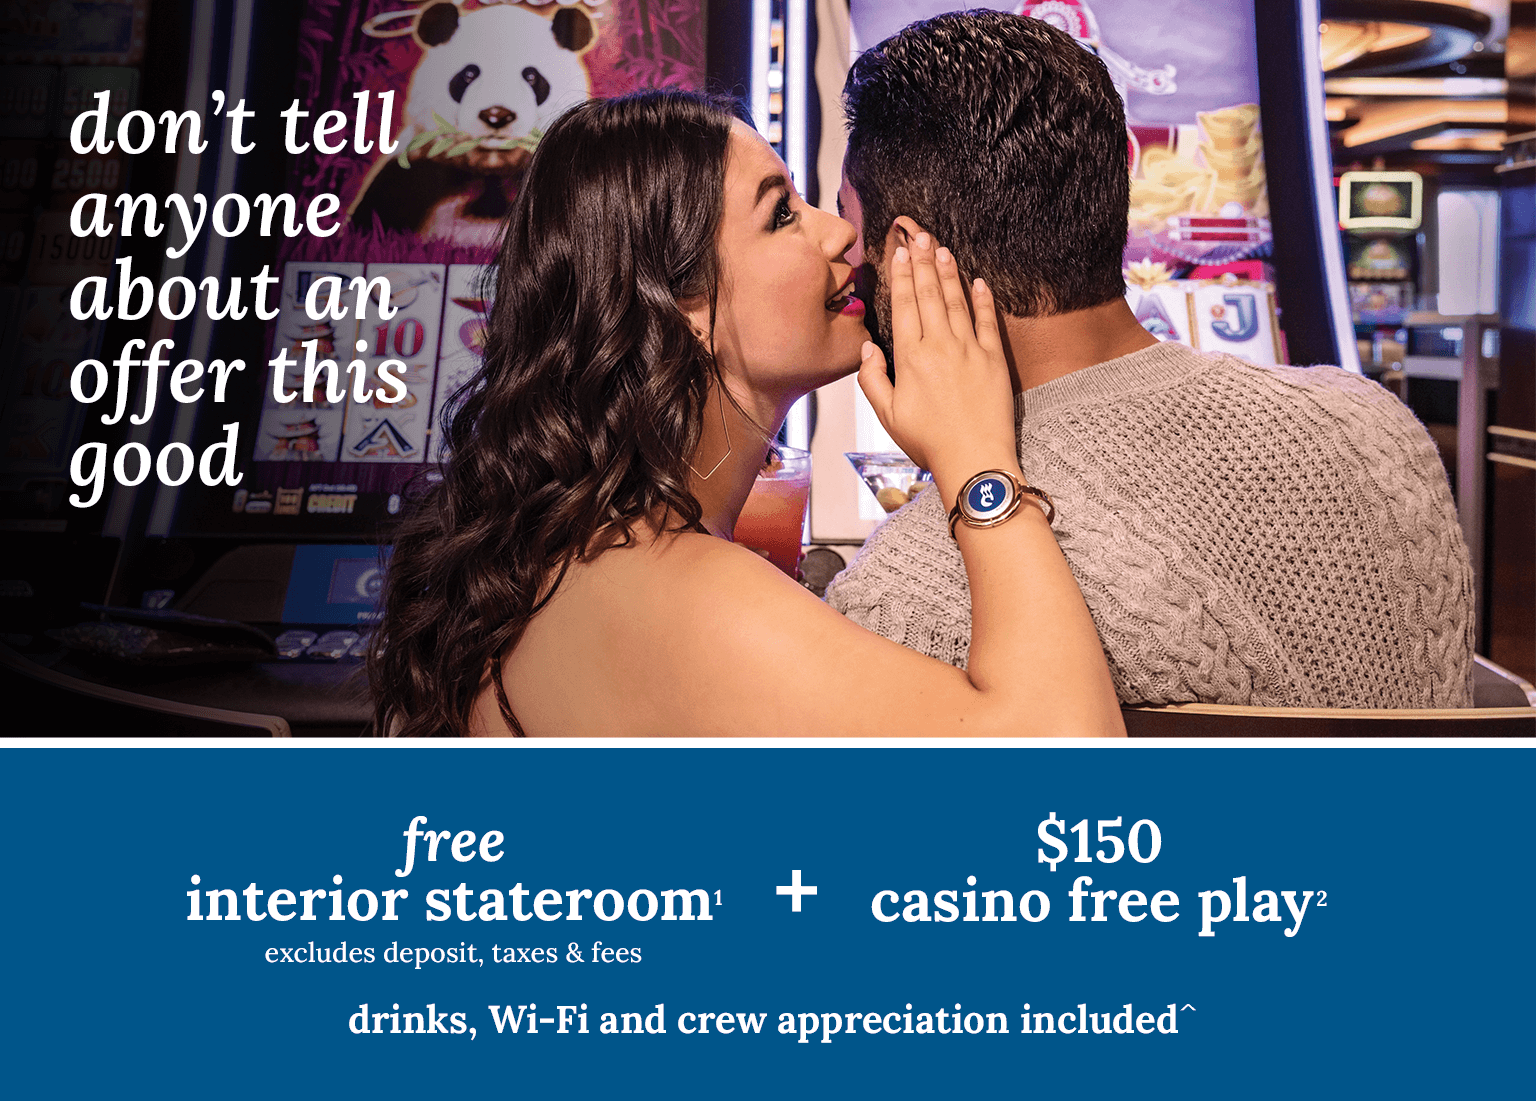 interior stateroom + $150 casino free play + drinks, Wi-Fi and crew appreciation included. Click here to book.